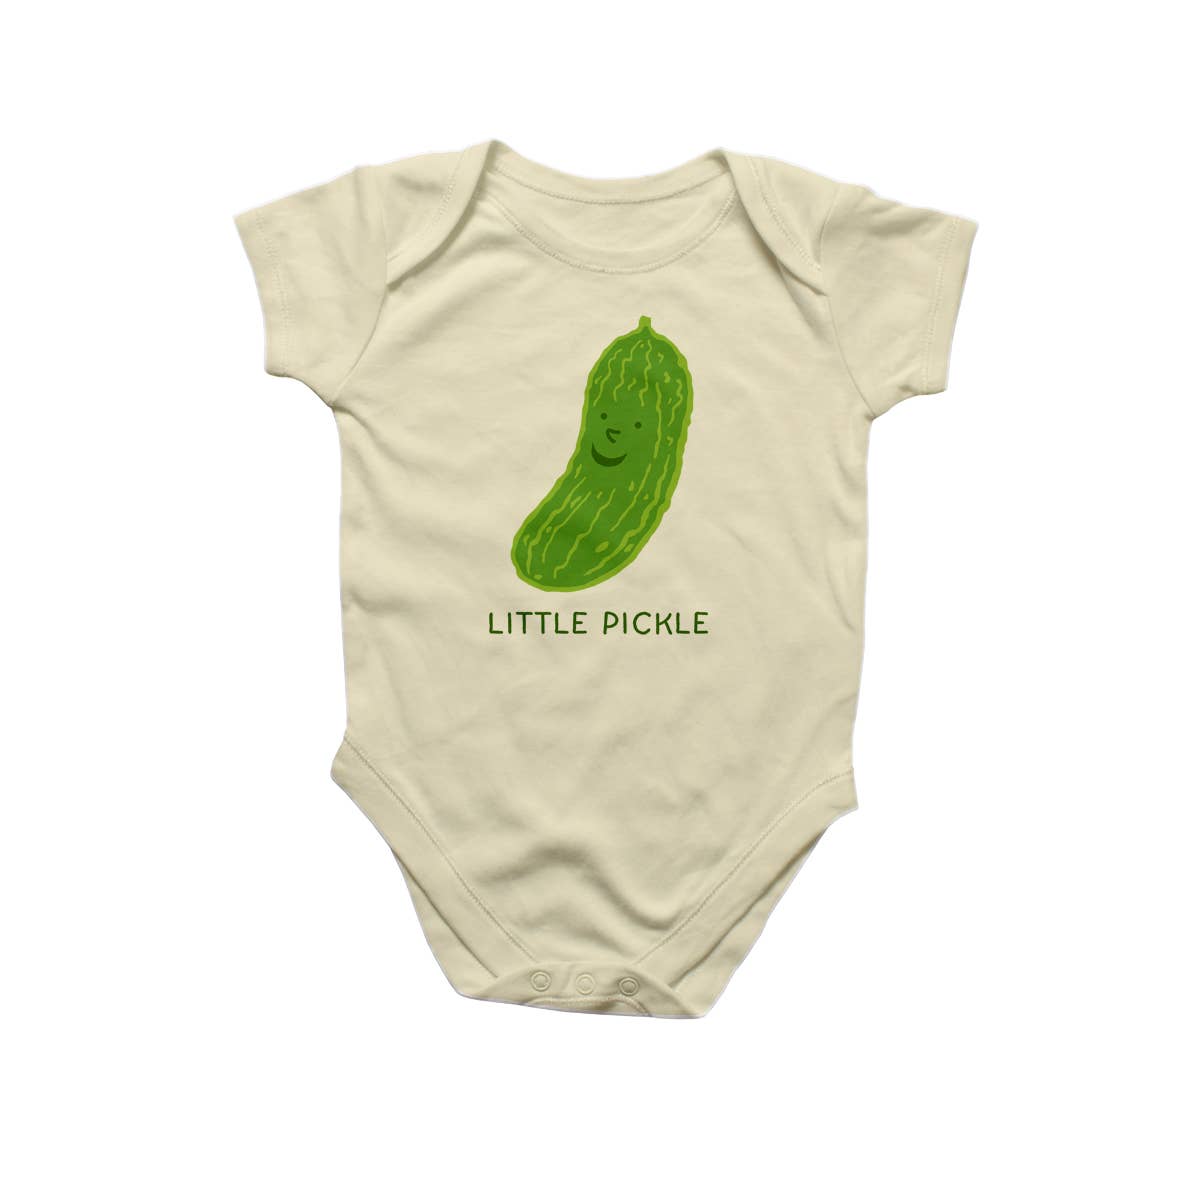 Baby onesie with snap closure on bottom -- has image of a dill pickle with a smiley face on it with text underneath that reads "little pickle" 